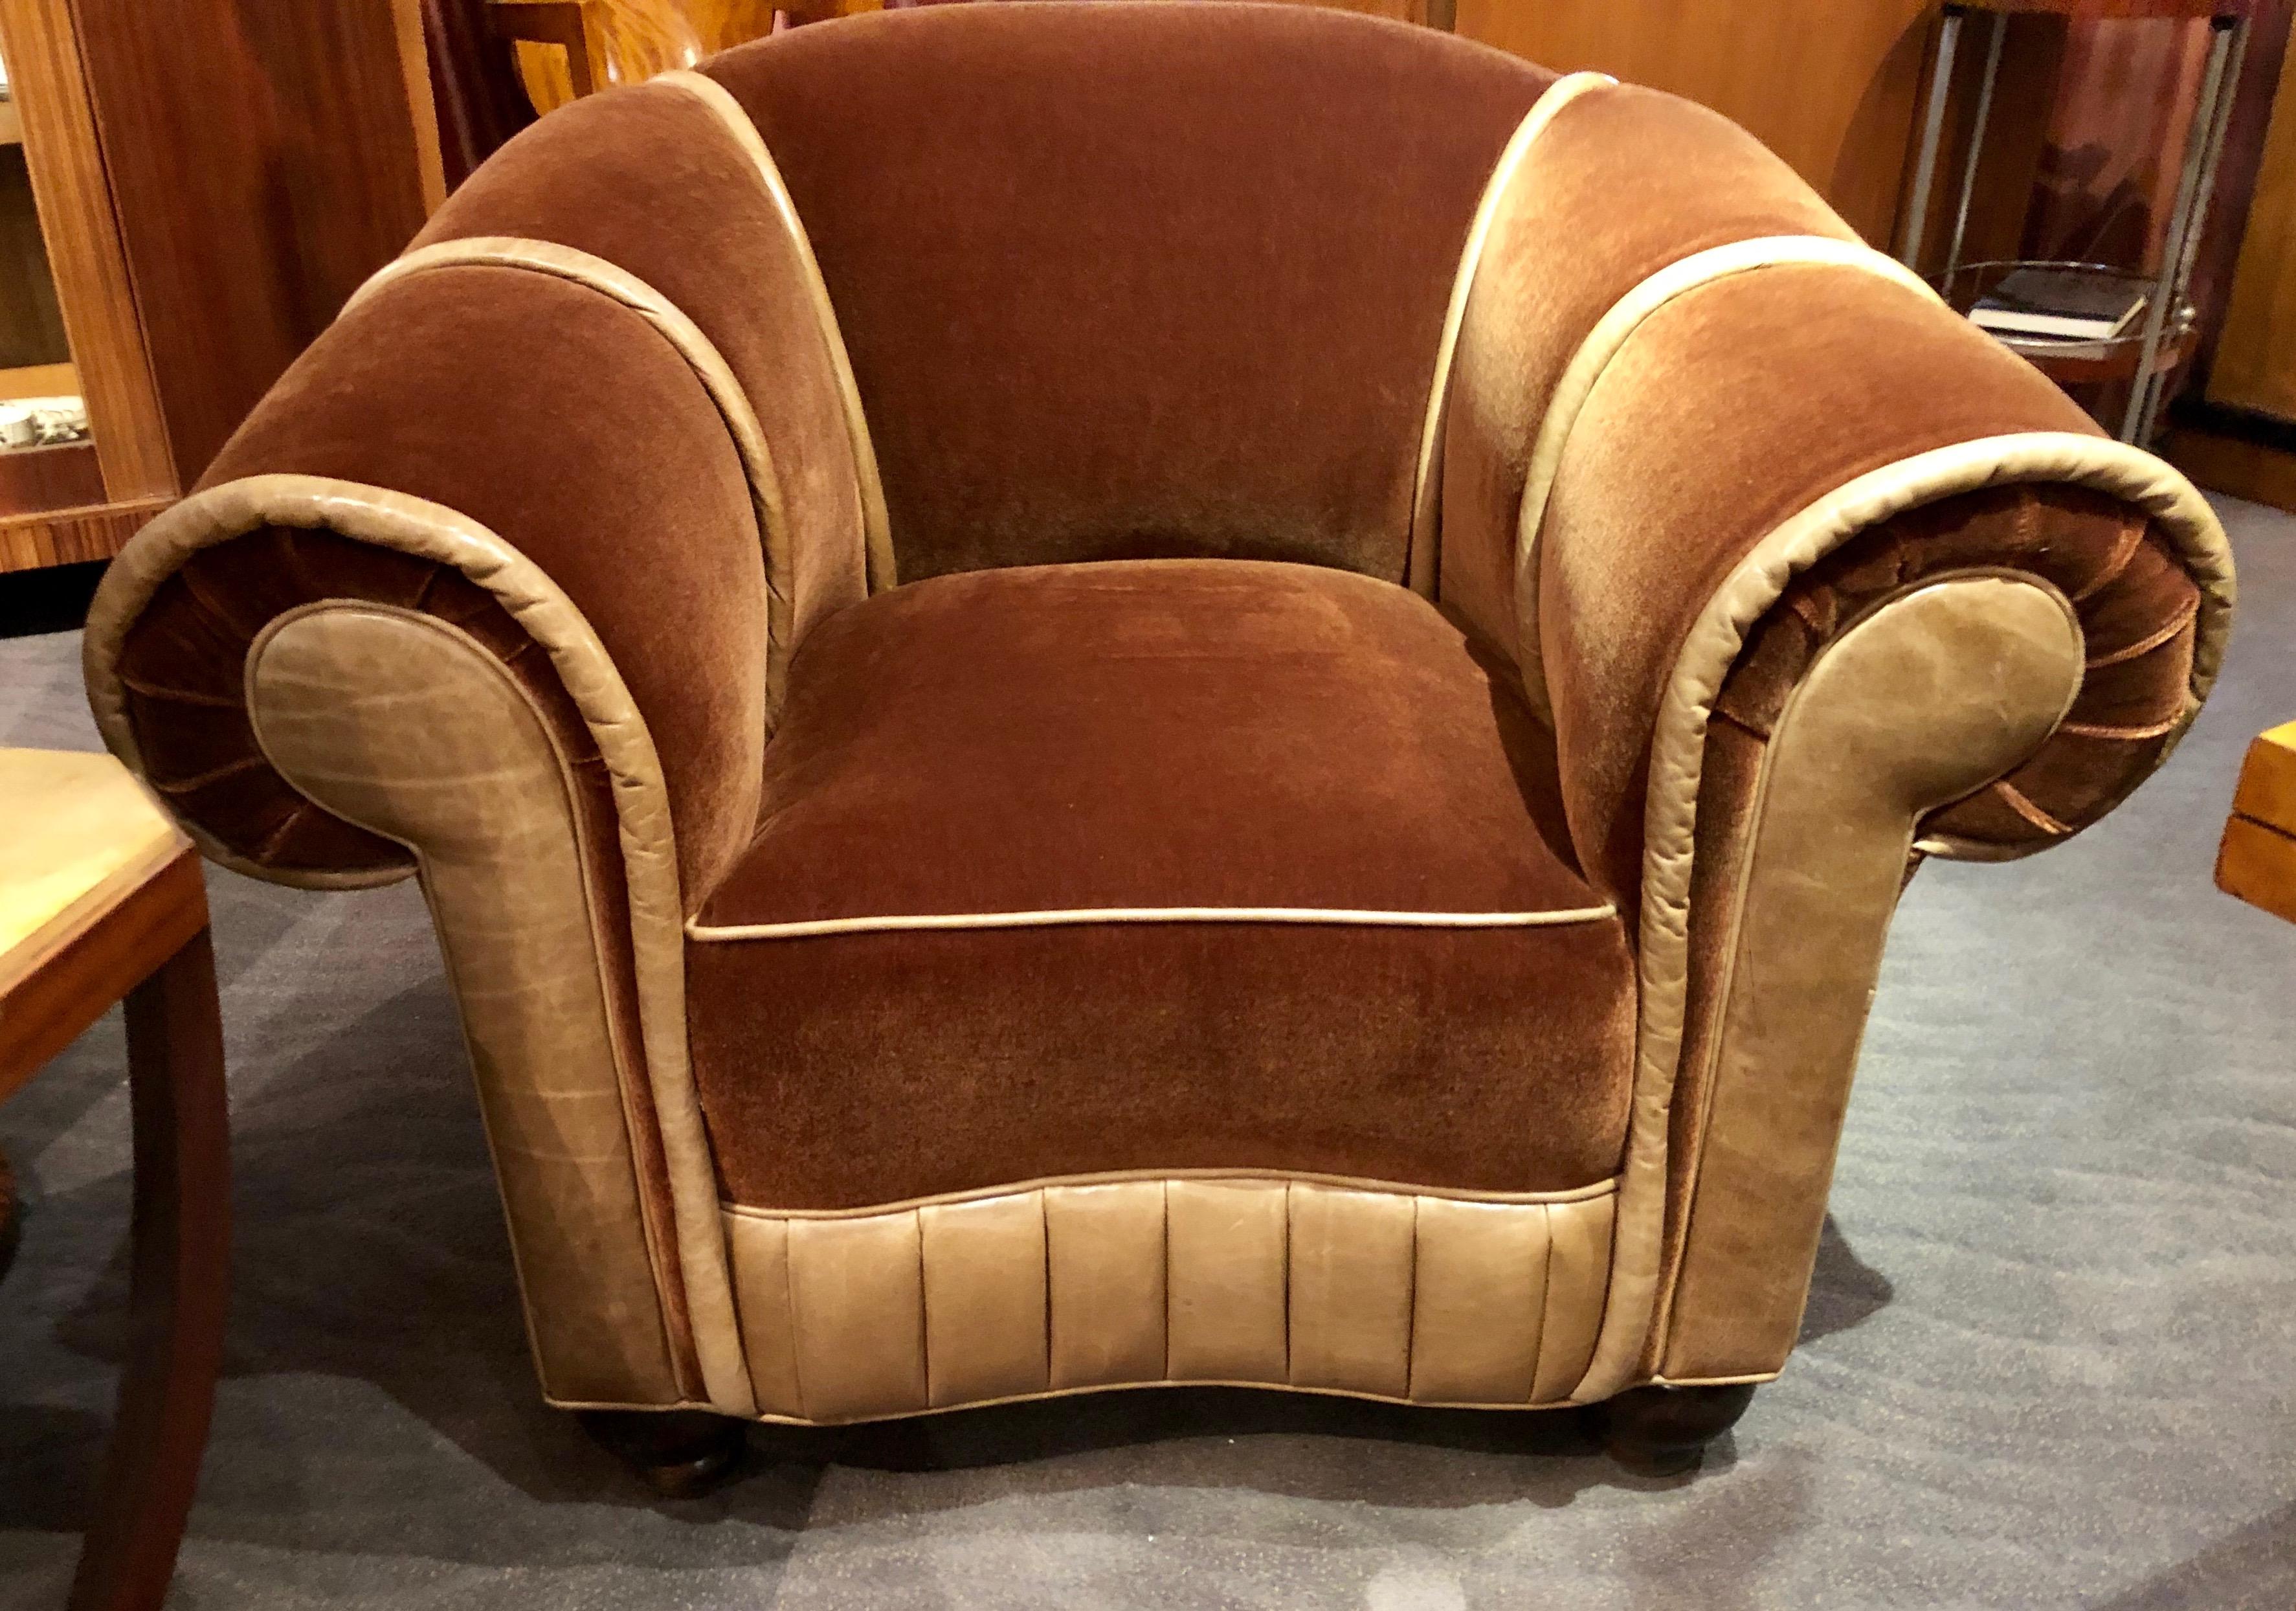 Art Deco glamour club chair. The is one off, restored with the finest materials of high quality rich root beer colored mohair and special leather. The design, inspired from an original Art Deco furniture catalogue. The oversized leather piping, with